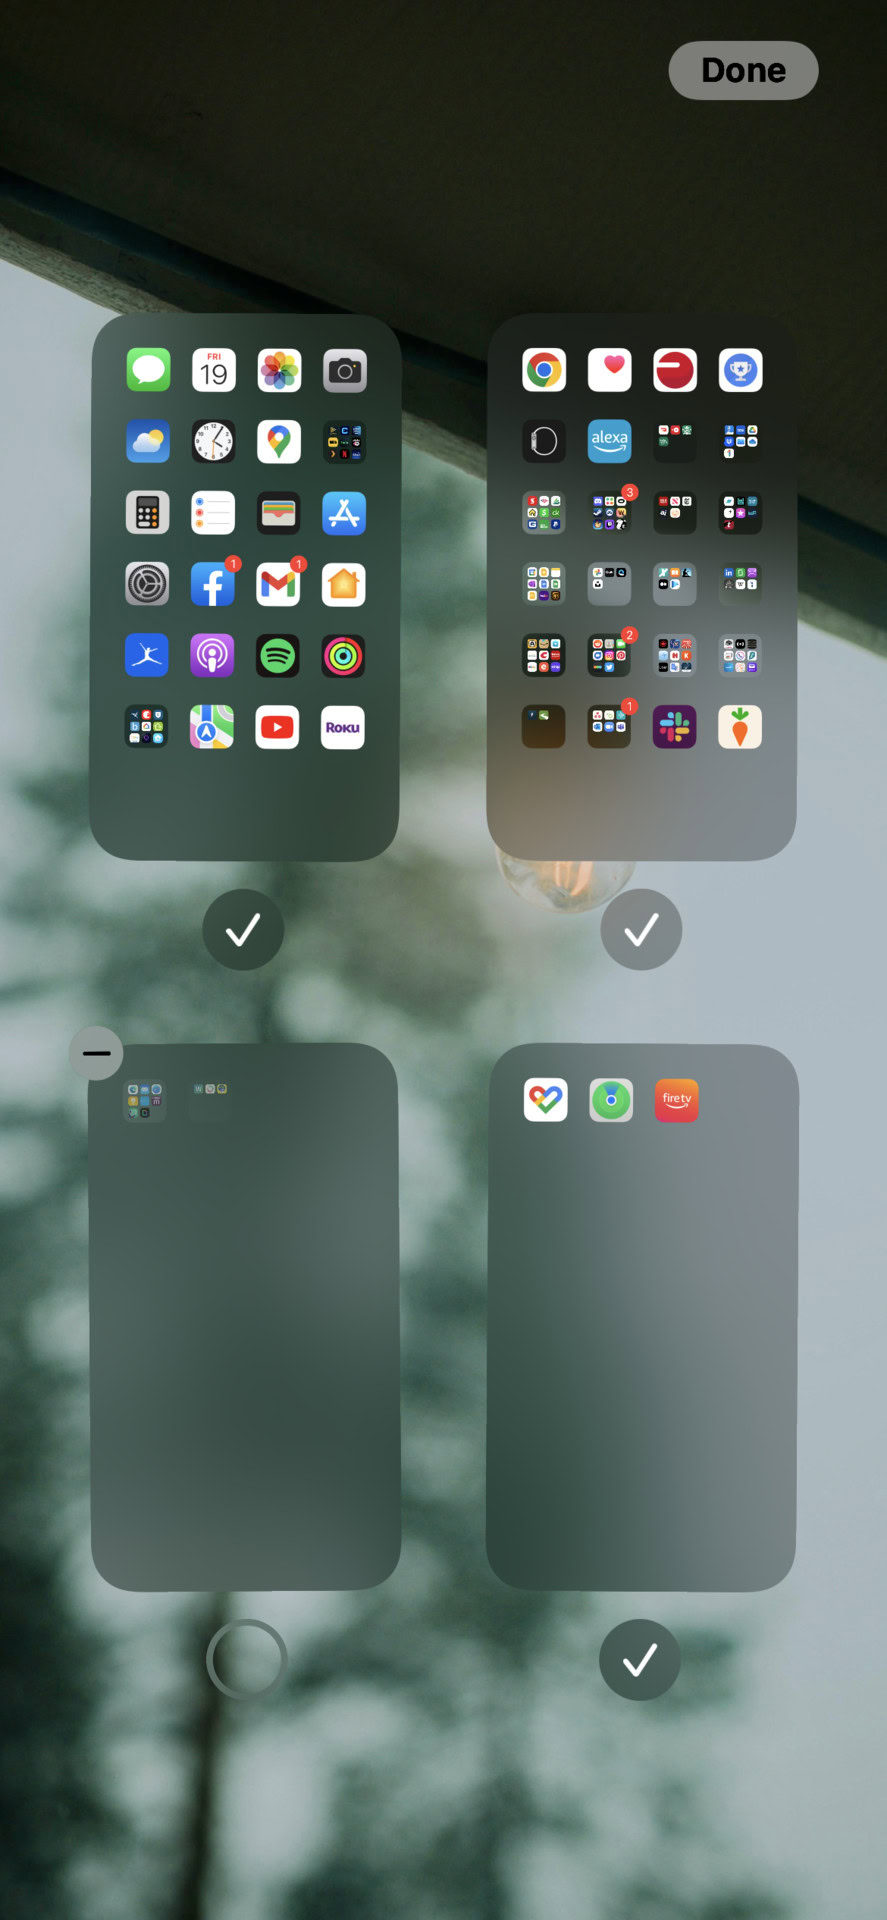 Managing homescreen pages in iOS 15